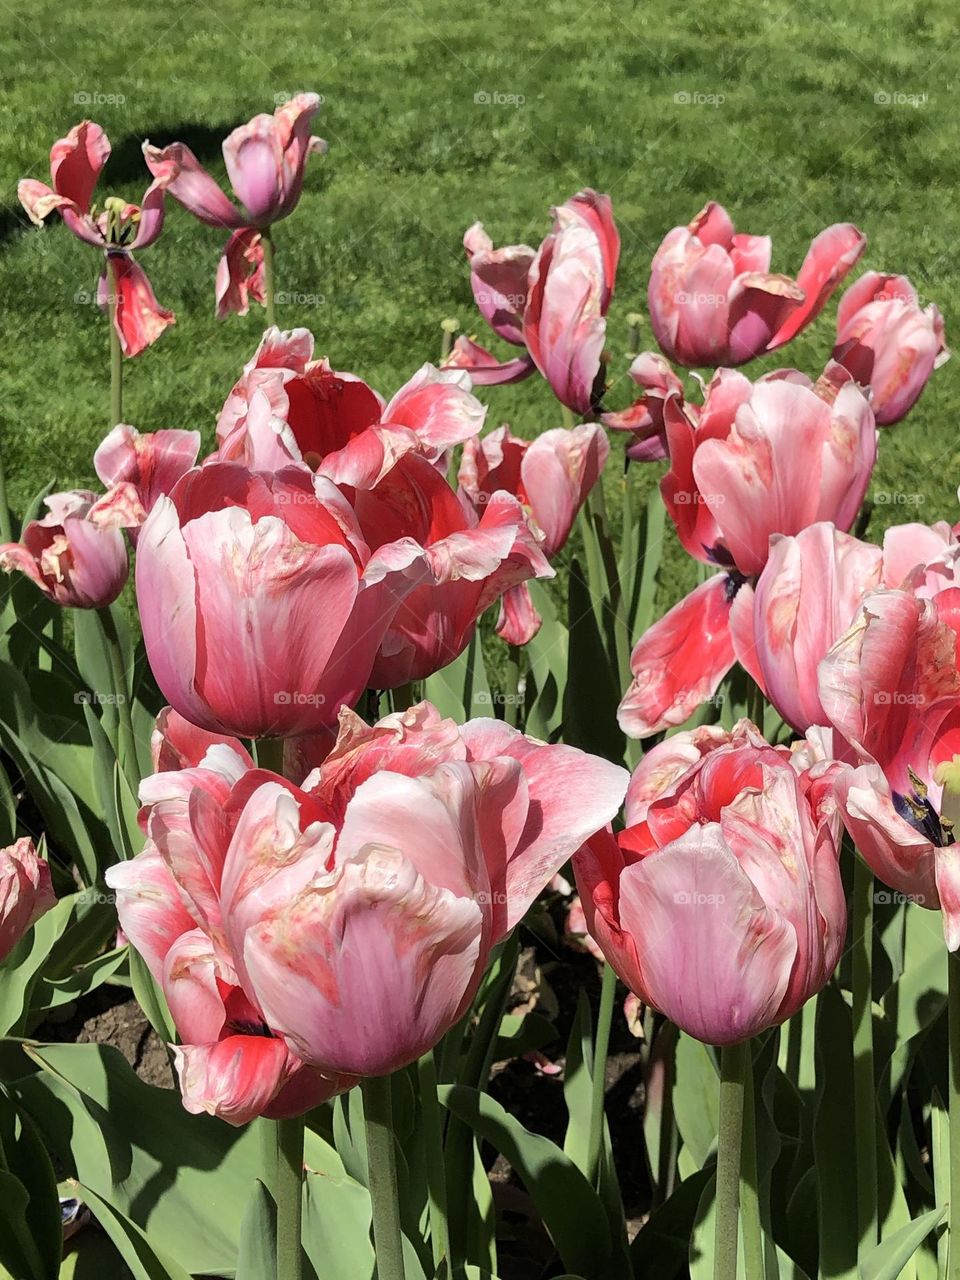 Tulips in the Spring, Boston, Mass